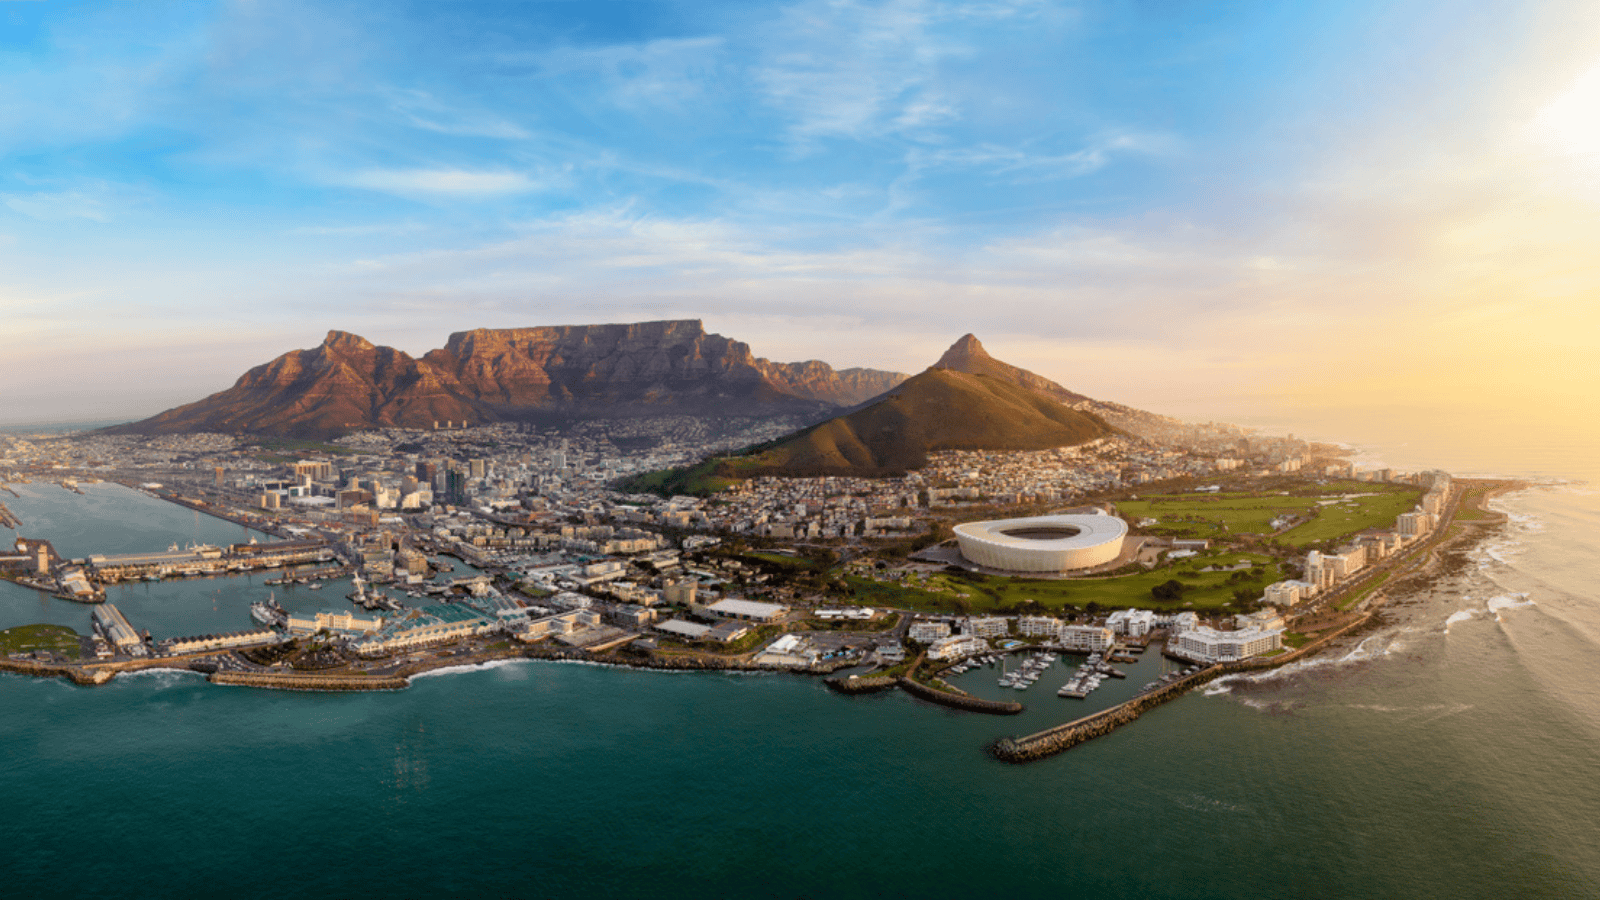 <p>The Best of Cape Town and the Bush trip has it all if you crave relaxation or adventure. <a href="https://www.lionworldtravel.com/safari/best-cape-town-and-bush" rel="nofollow external noopener noreferrer">Lion World Travel</a> hosts this 10-day journey, exploring iconic places like Franschhoek village and Sabi Sands Game Preserve. During your vacation, you’ll go on guided outings with game experts who will educate you about the native animals. </p>